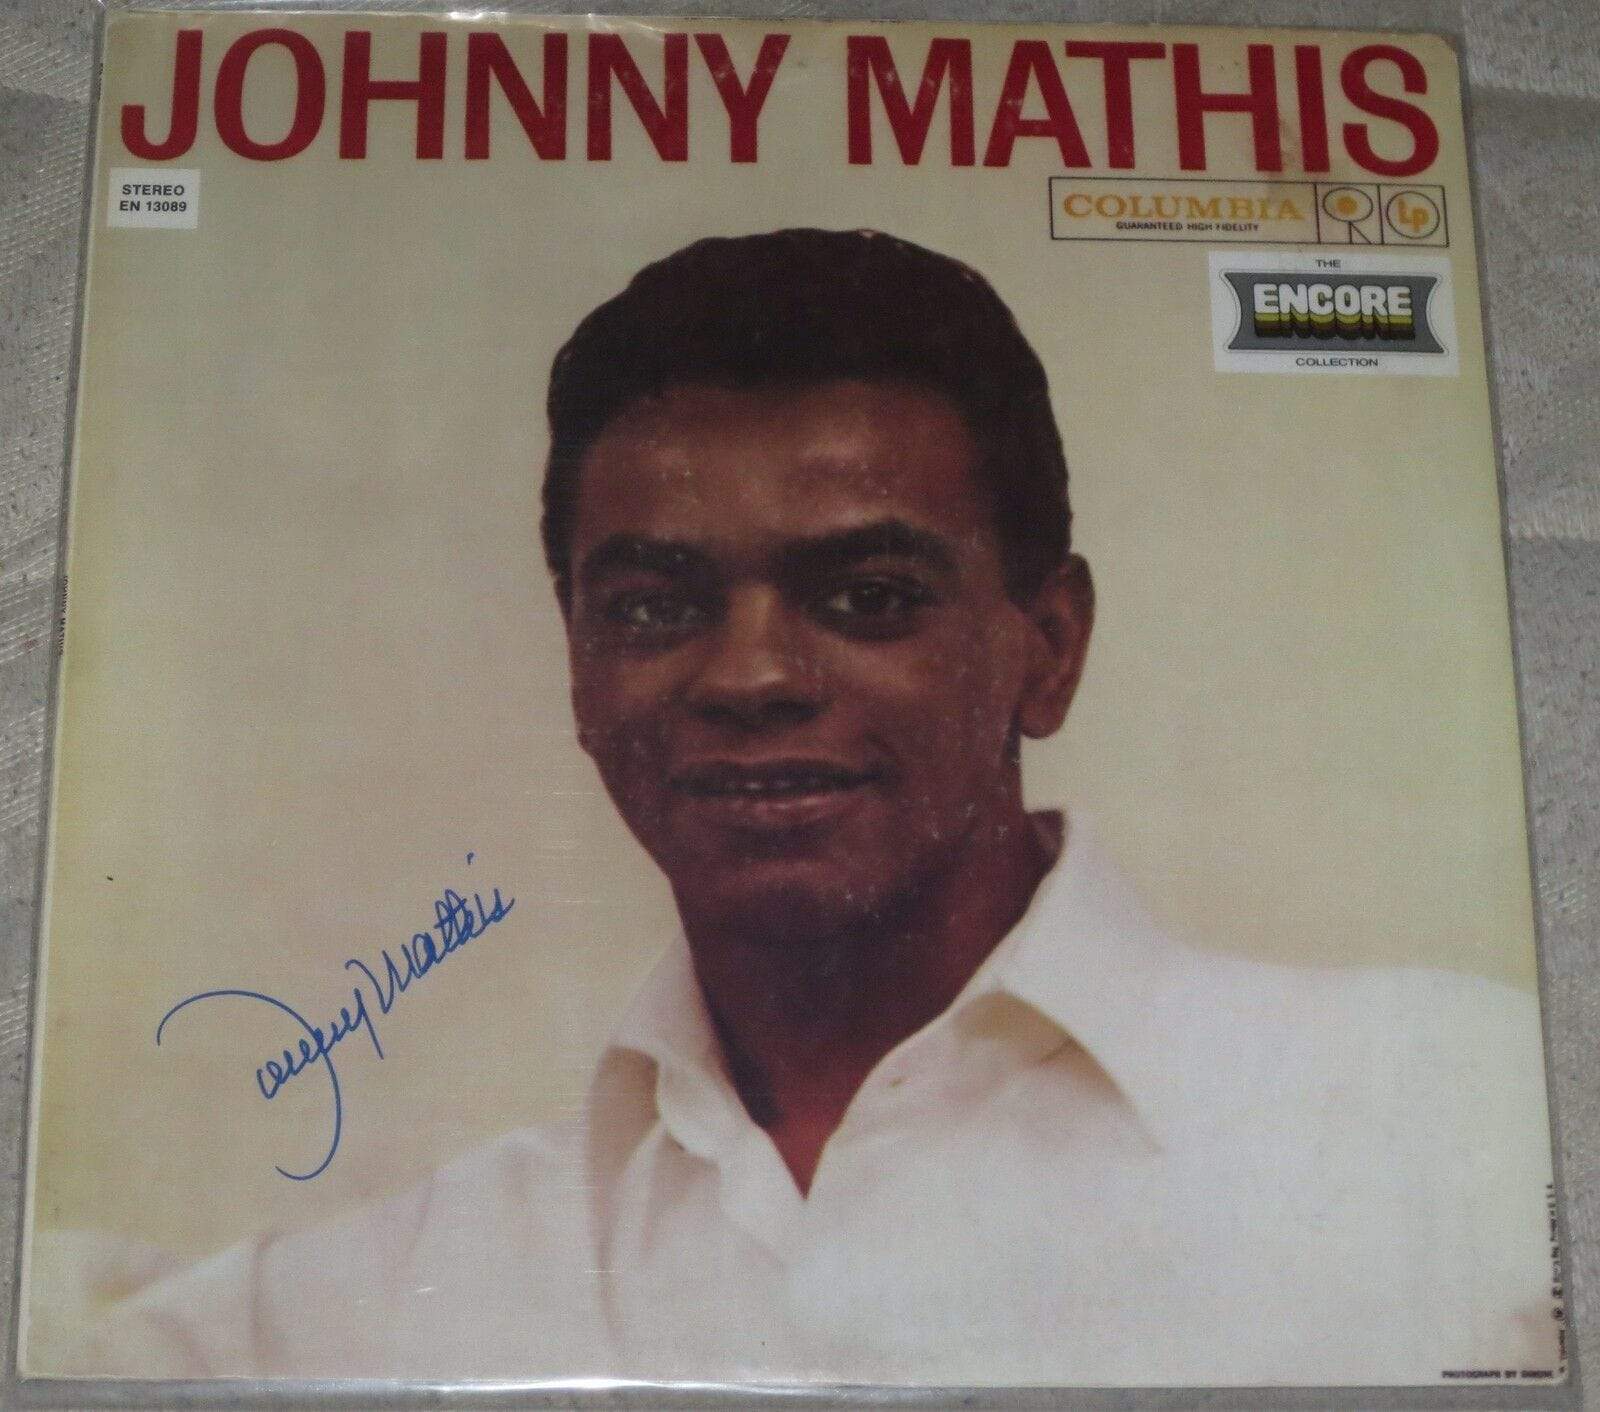 Johnny Mathis Signed Vinyl - Prime Time Signatures - Music